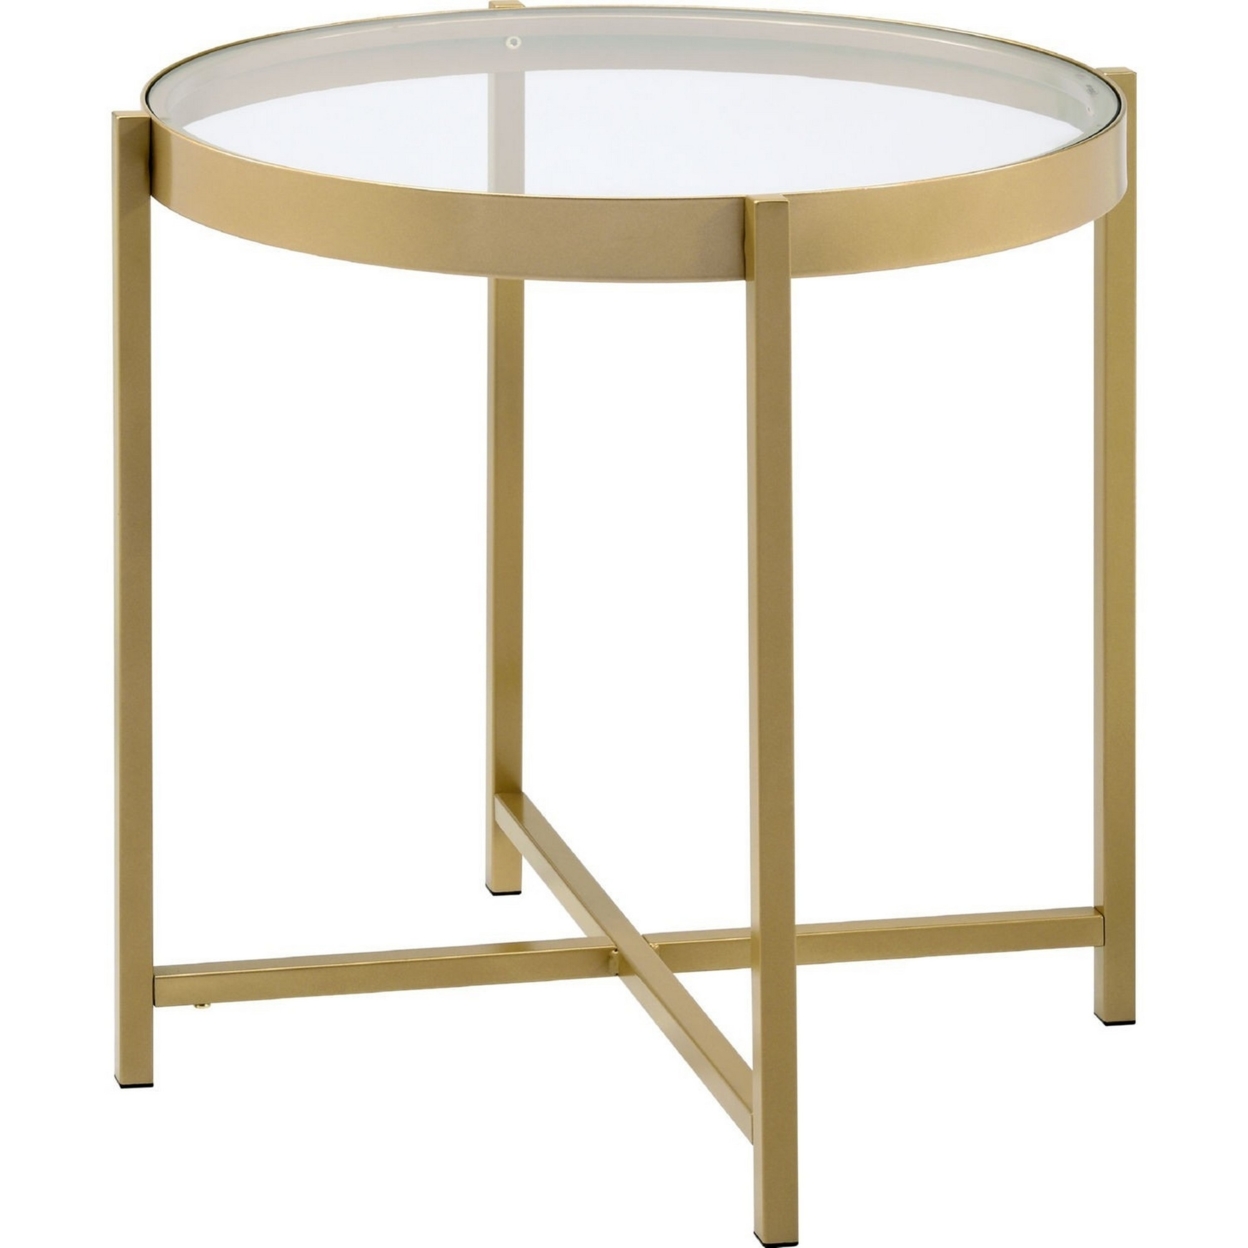 End Table With Round Glass Top And Metal Frame, Gold- Saltoro Sherpi